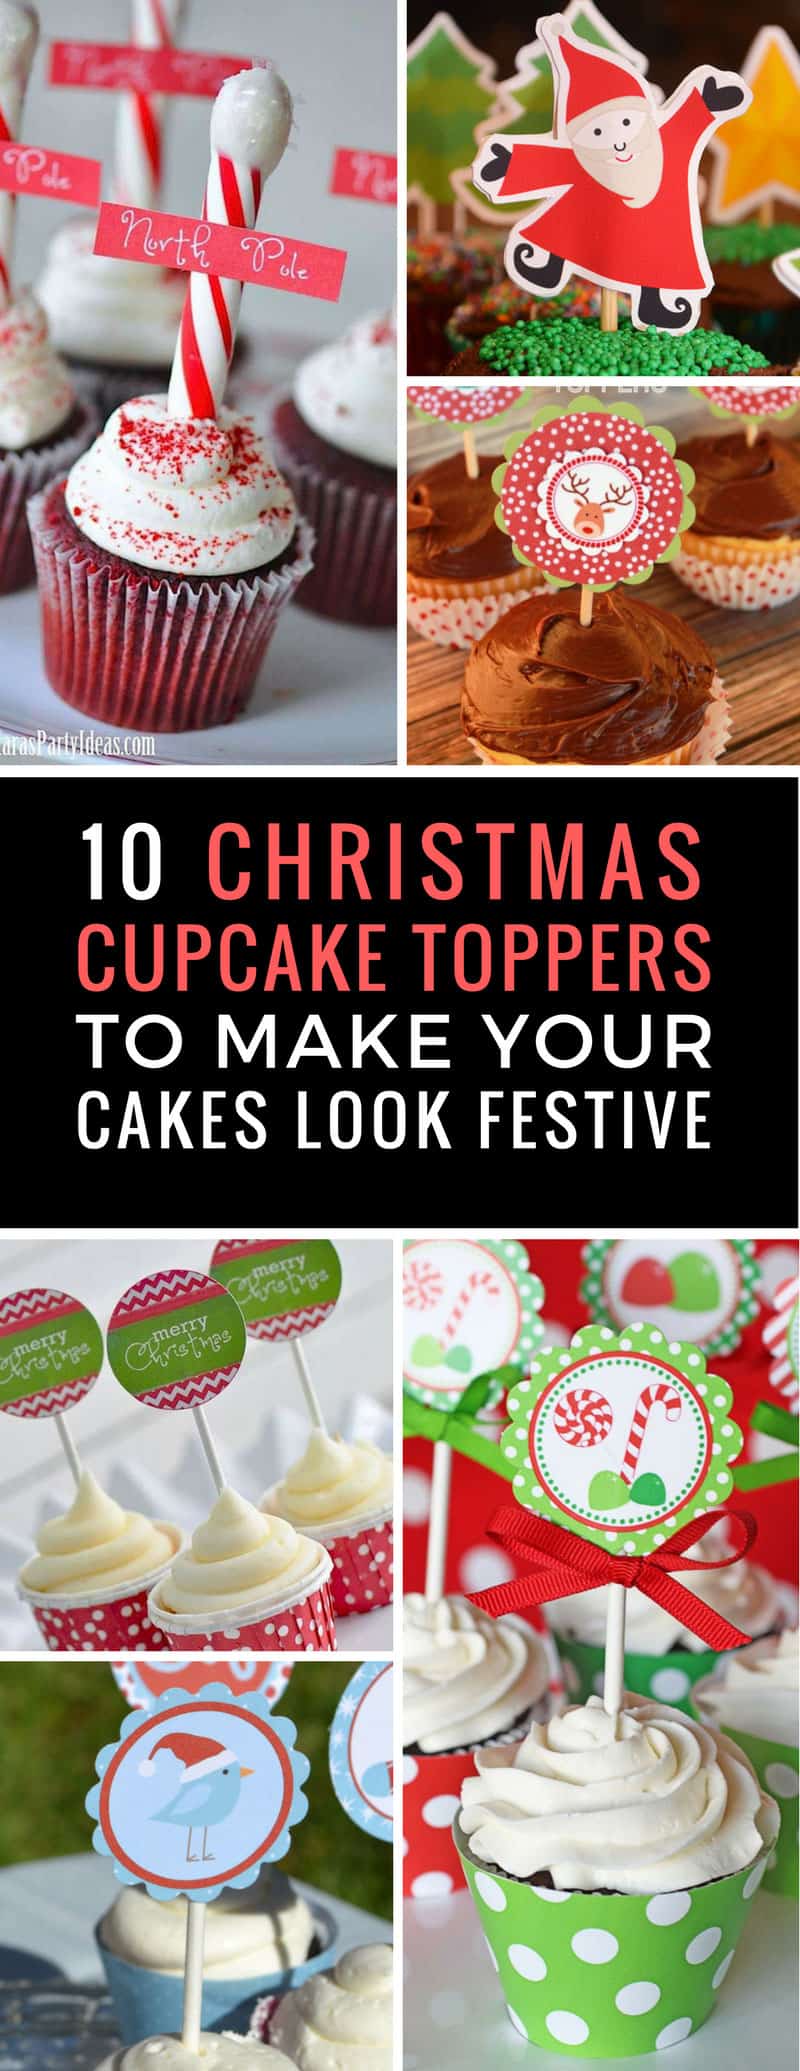 Need festive cupcakes but no time to bake? Don't panic! Just buy some cupcakes at the store and then add some of these free cupcake toppers to make them look totally festive! | Cupcake Toppers | Christmas | Just Bright Ideas